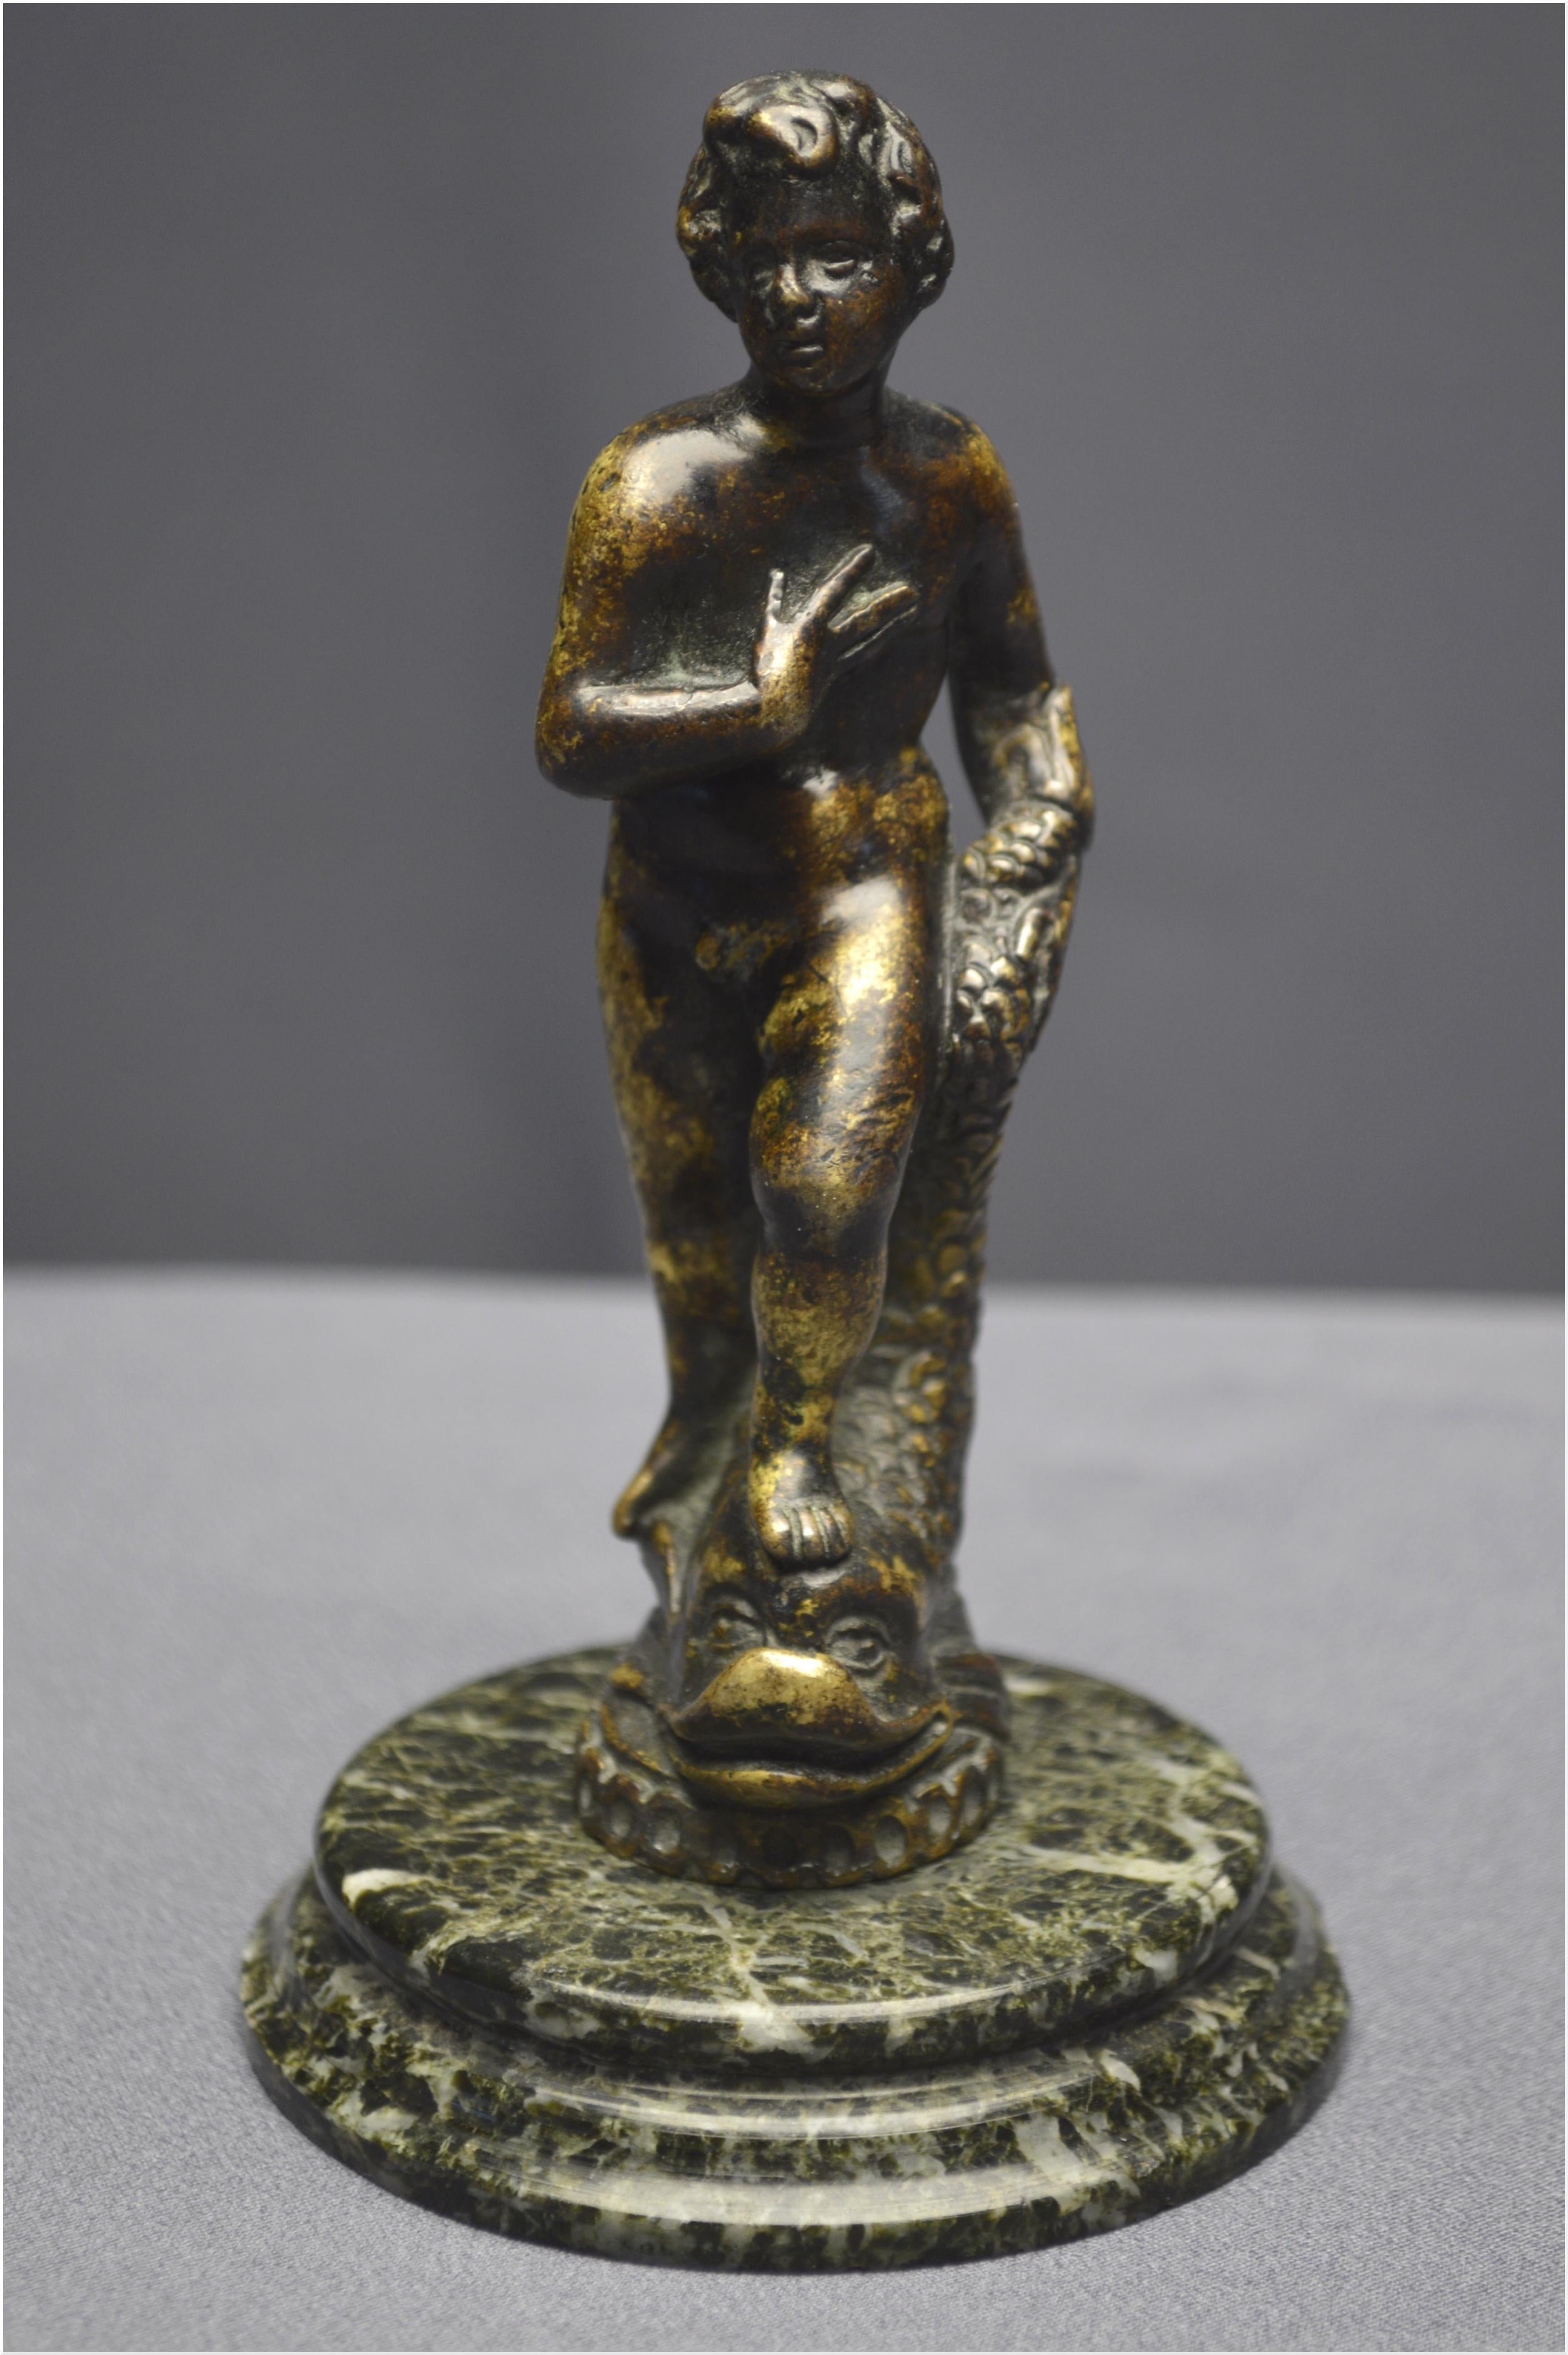 Italy, Renaissance period, 16th century, Bronze statuette representing a young man with a dolphin.

Italy, possibly Florence
Renaissance period, 16th century

Rare bronze statuette representing a naked young man with a dolphin. He is shown standing